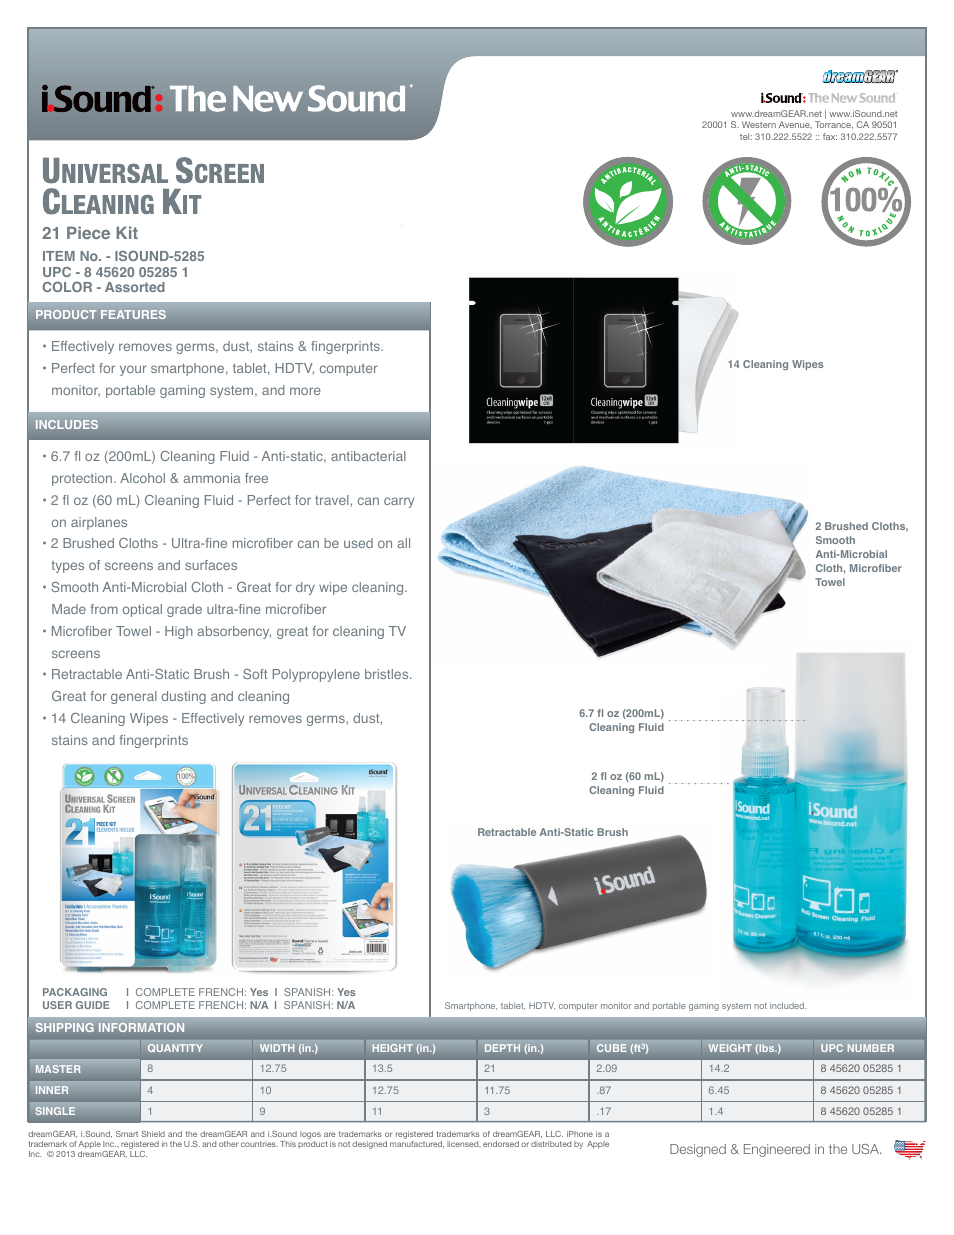 Universal Screen Cleaning Kit - Sell Sheet